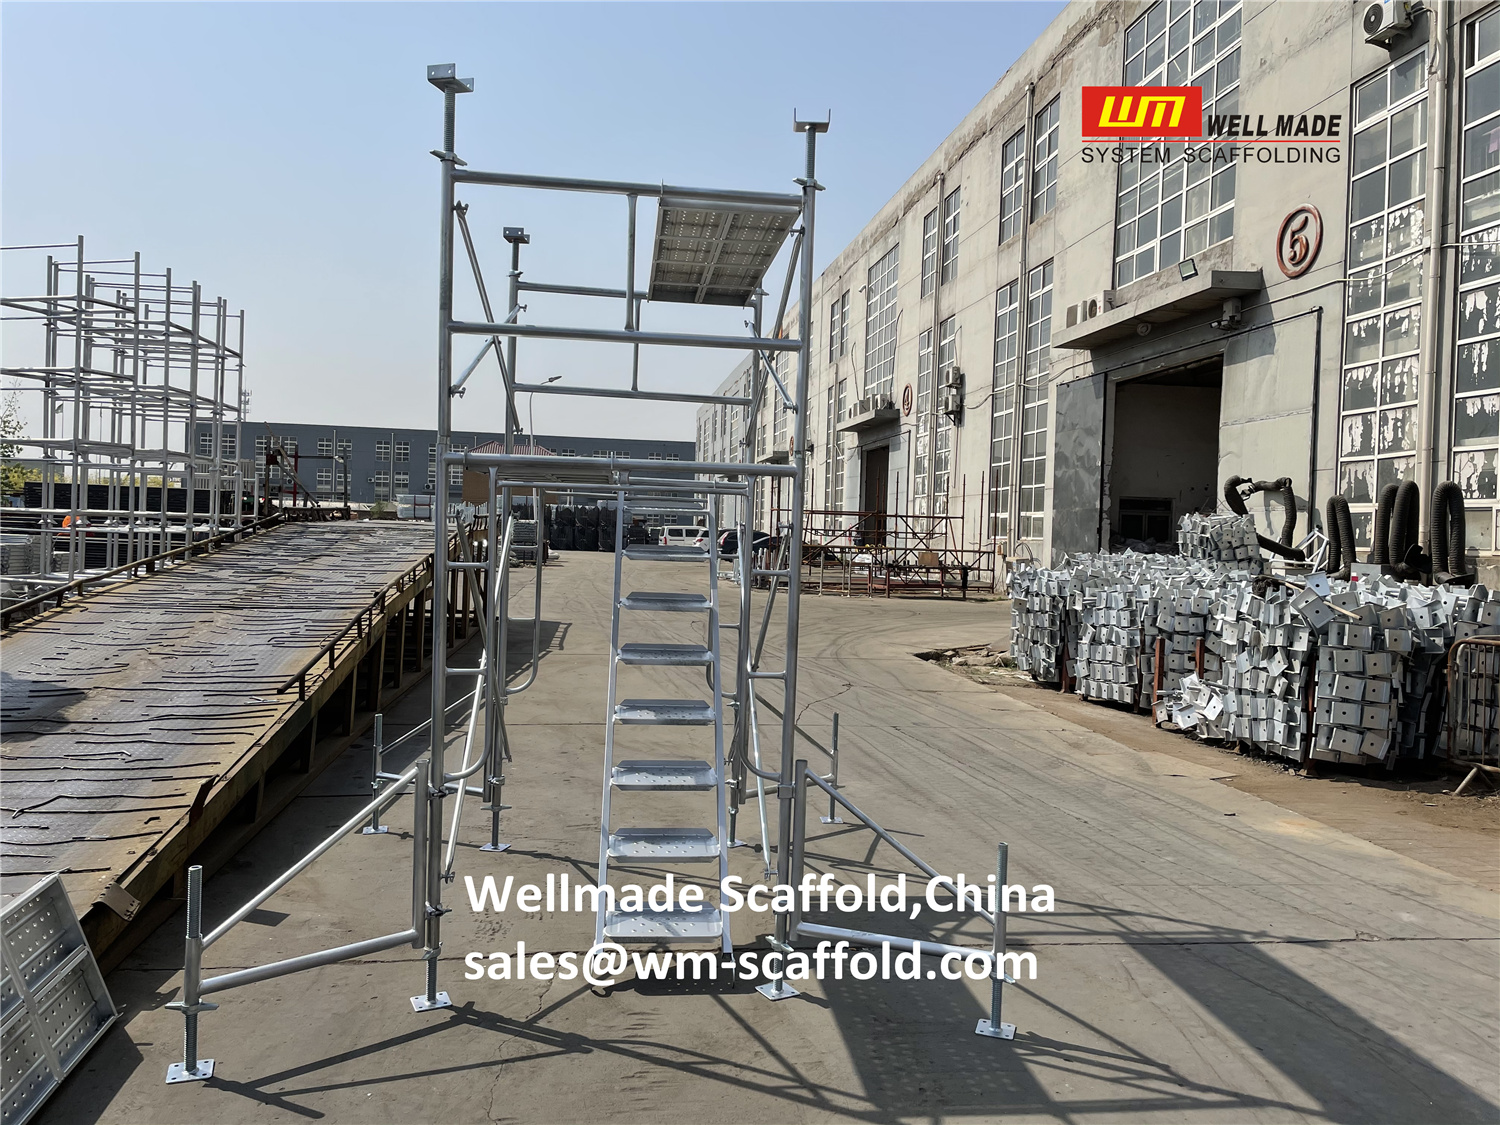 Construction frame scaffolding sets with walk boards and stairs - Wellmade